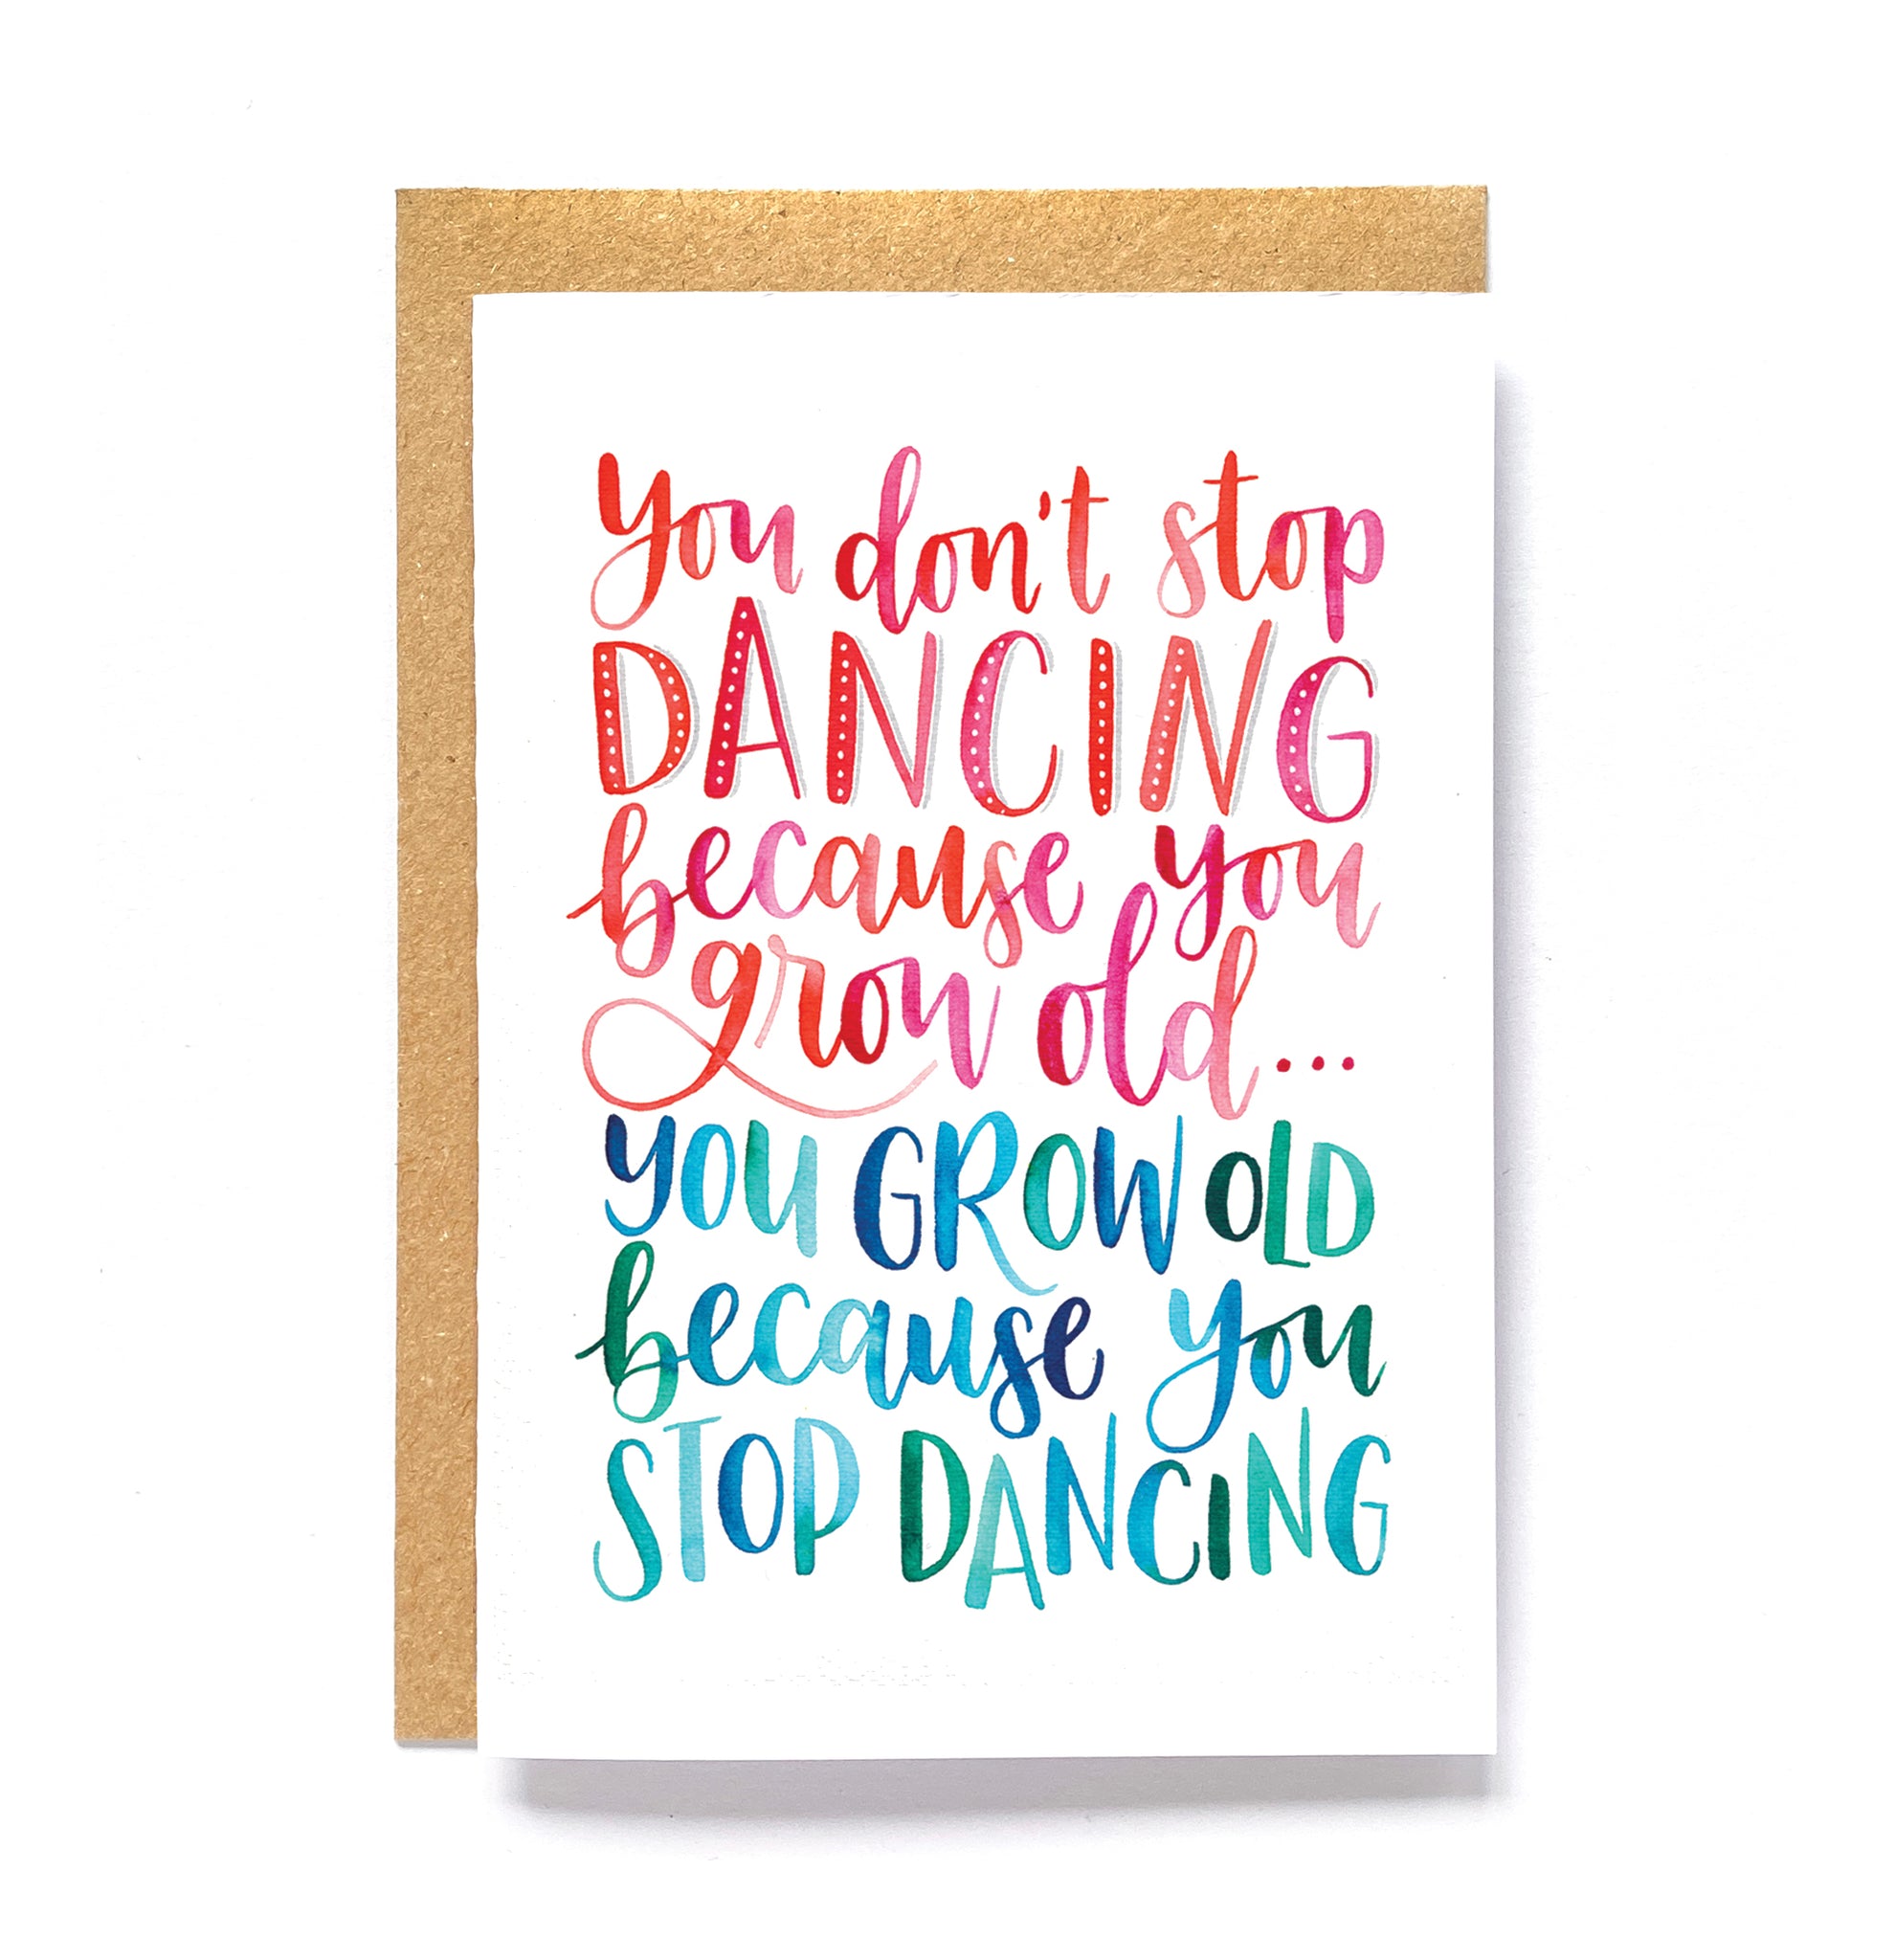 Greetings card - You don't stop dancing because you grow old, you grow old because you stop dancing